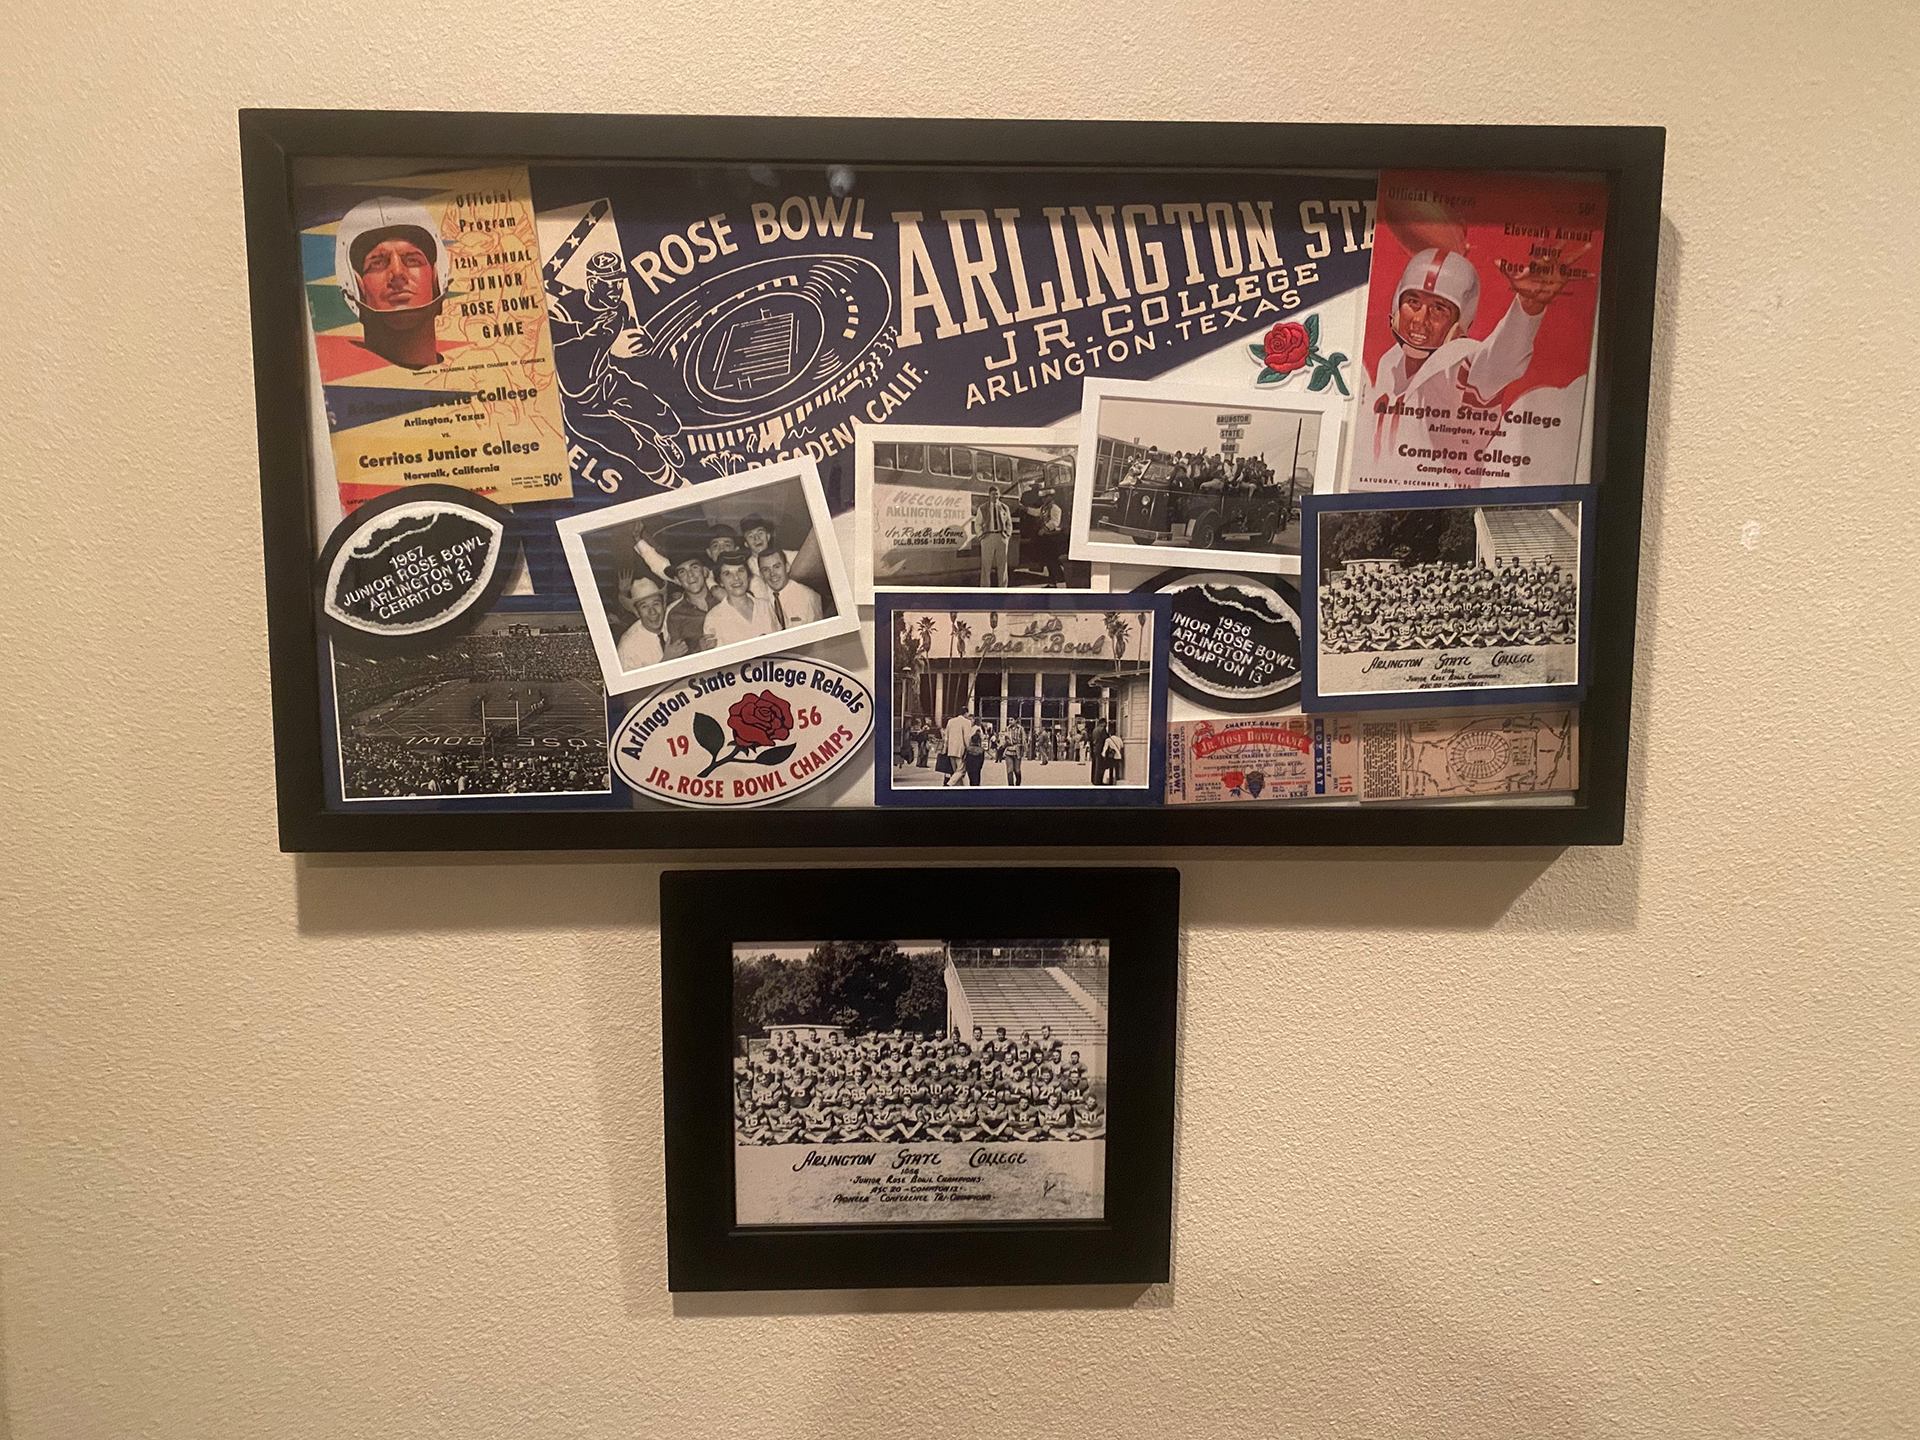 A shadow box featuring tons of memorabilia of Arlington State College's 1956 Junior Rose Bowl win, include the program, a ticket, a pennant, and photos.